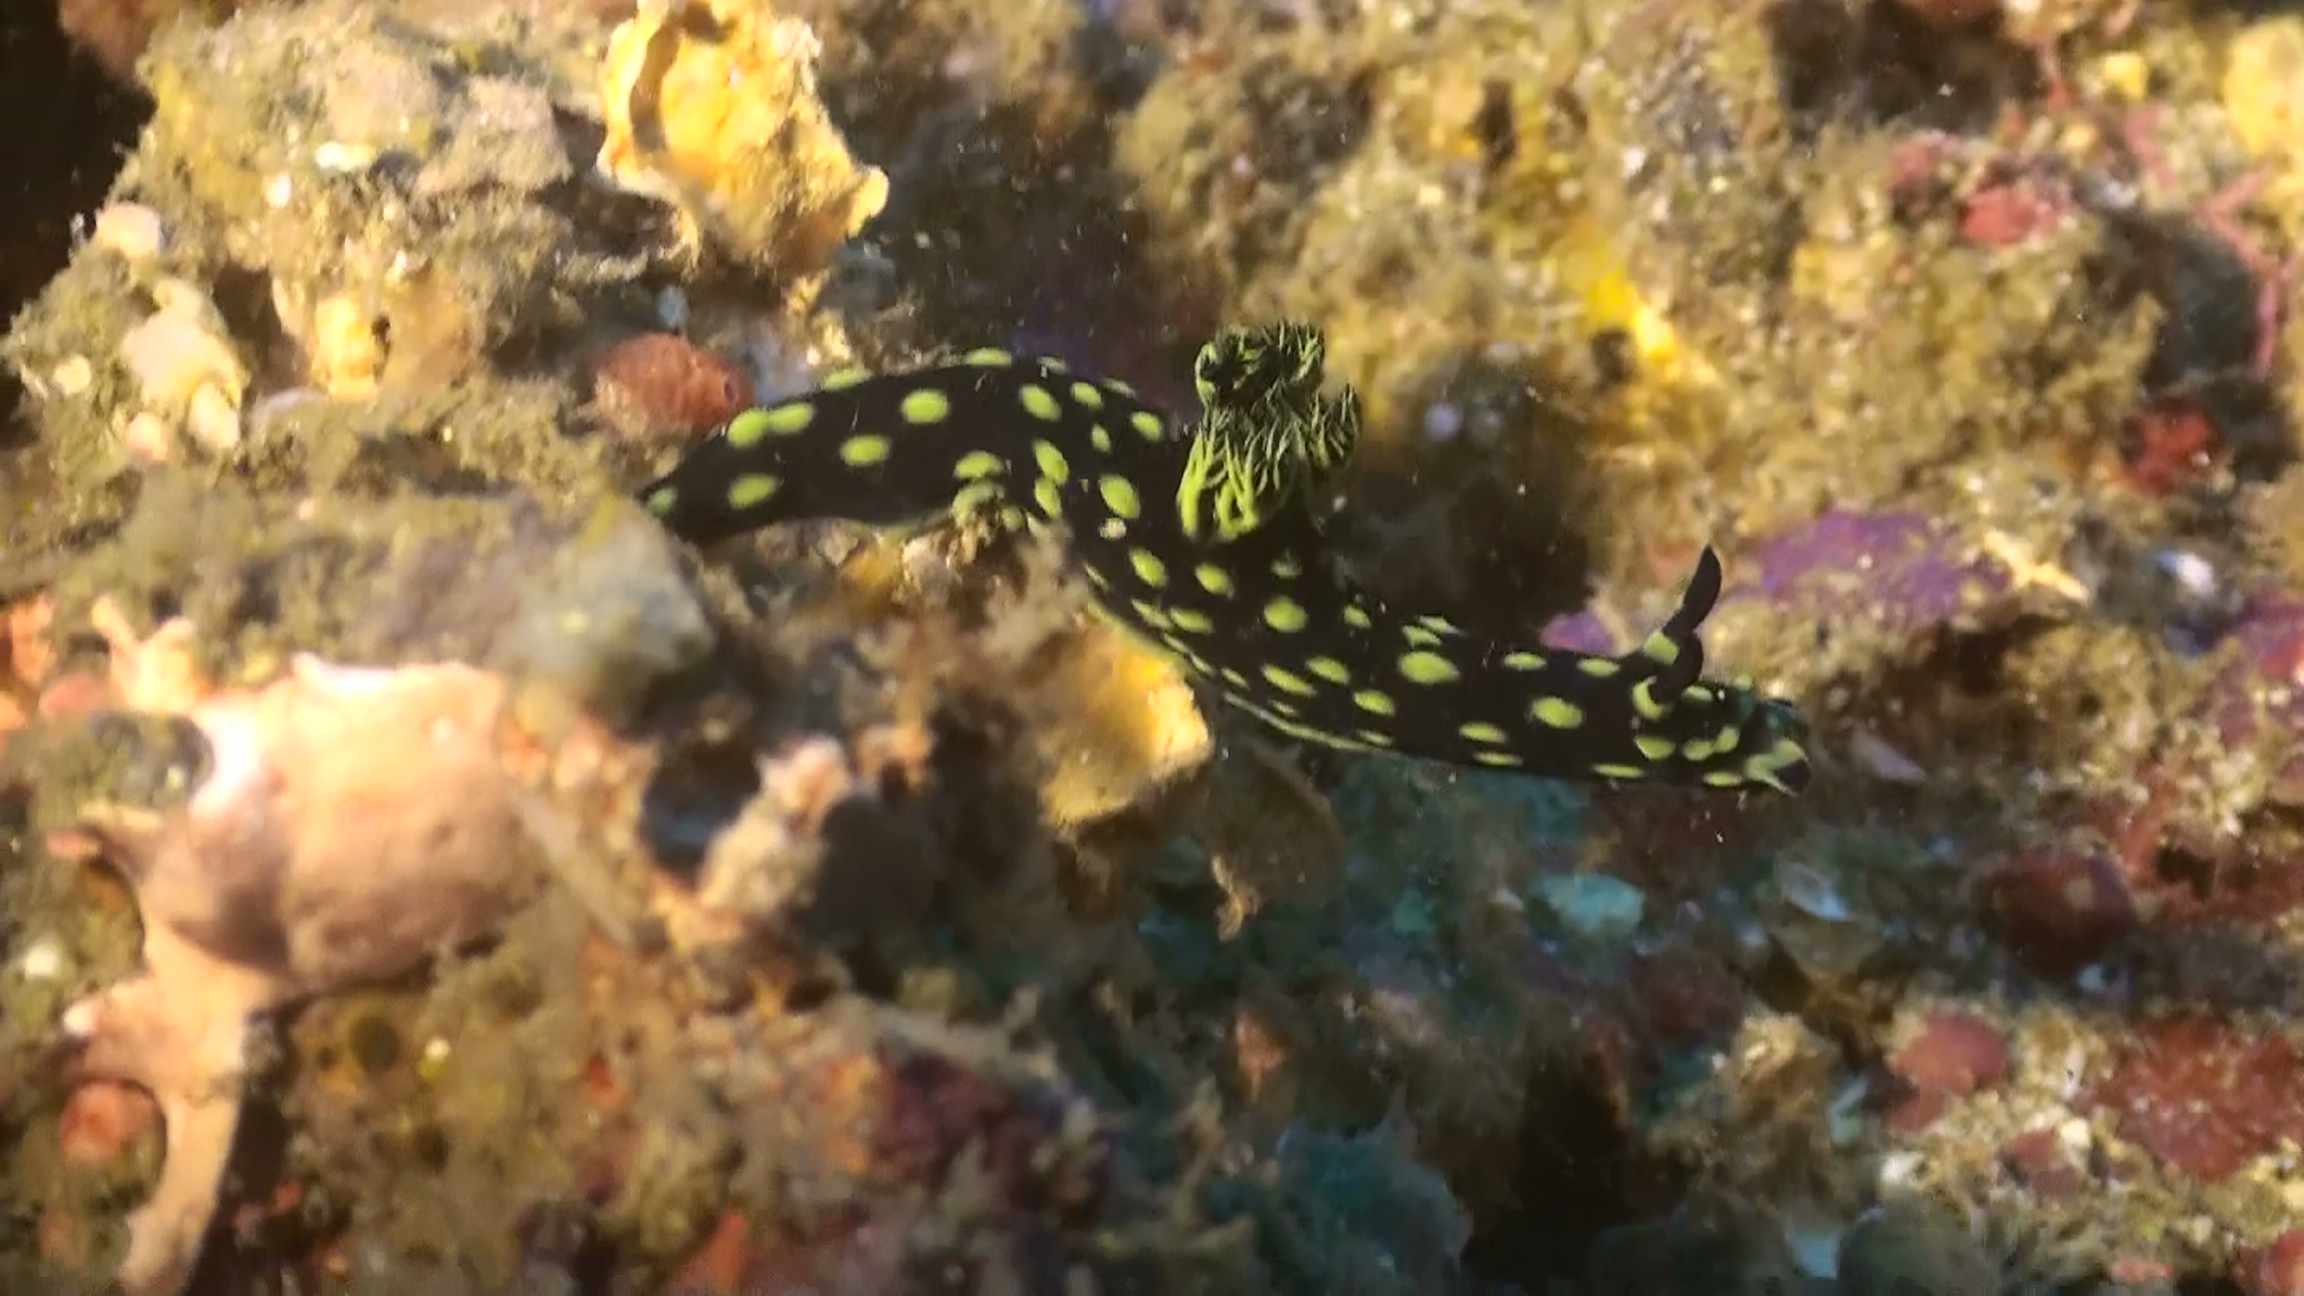 Nudibranch on the hunt